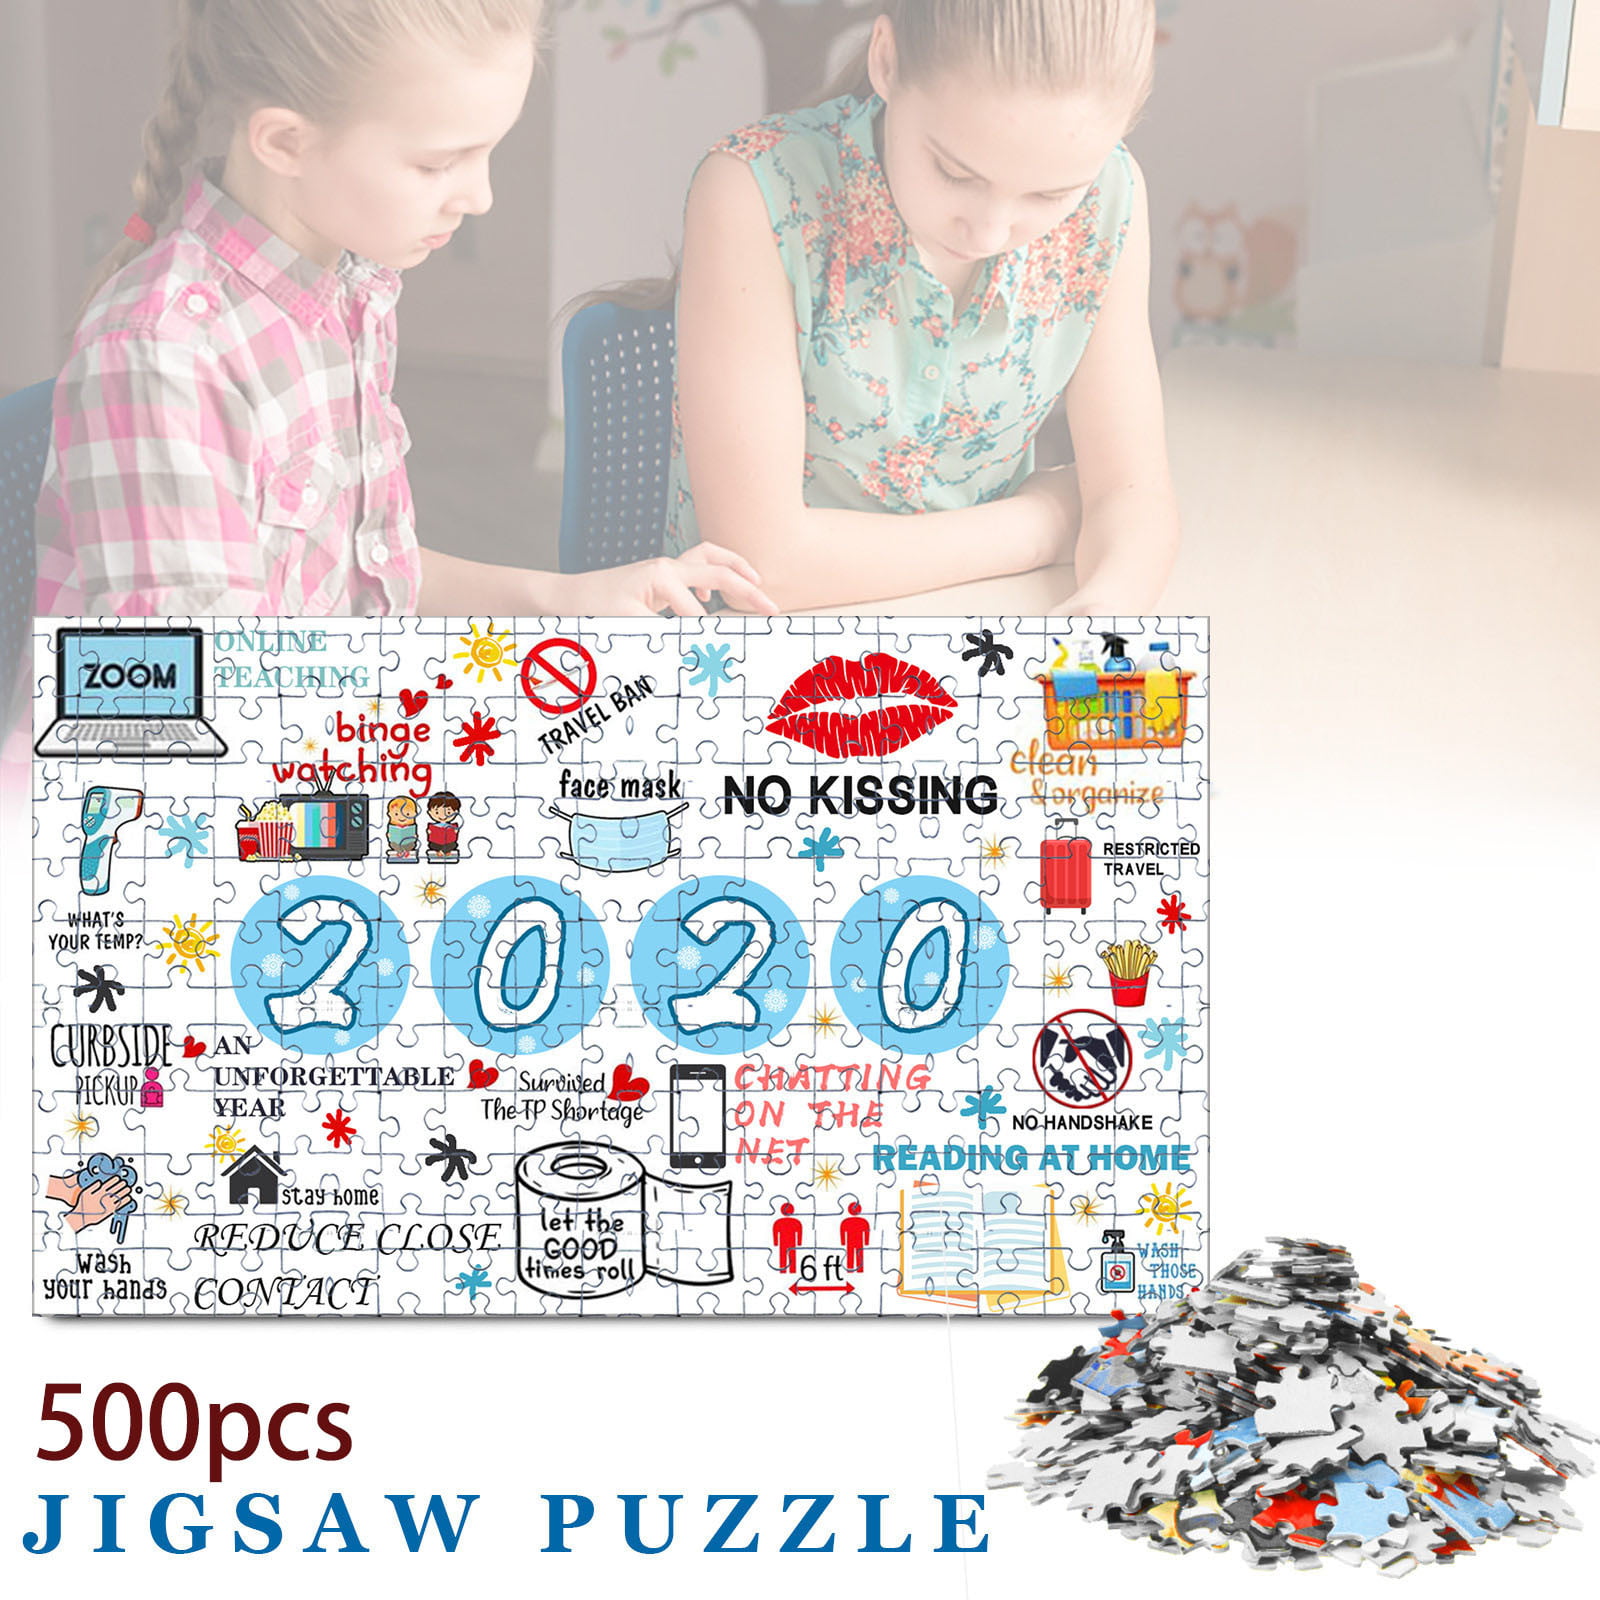 New Puzzle Jigsaw 500 Piece Pieces Edition for Kids Adult Puzzles Educational 